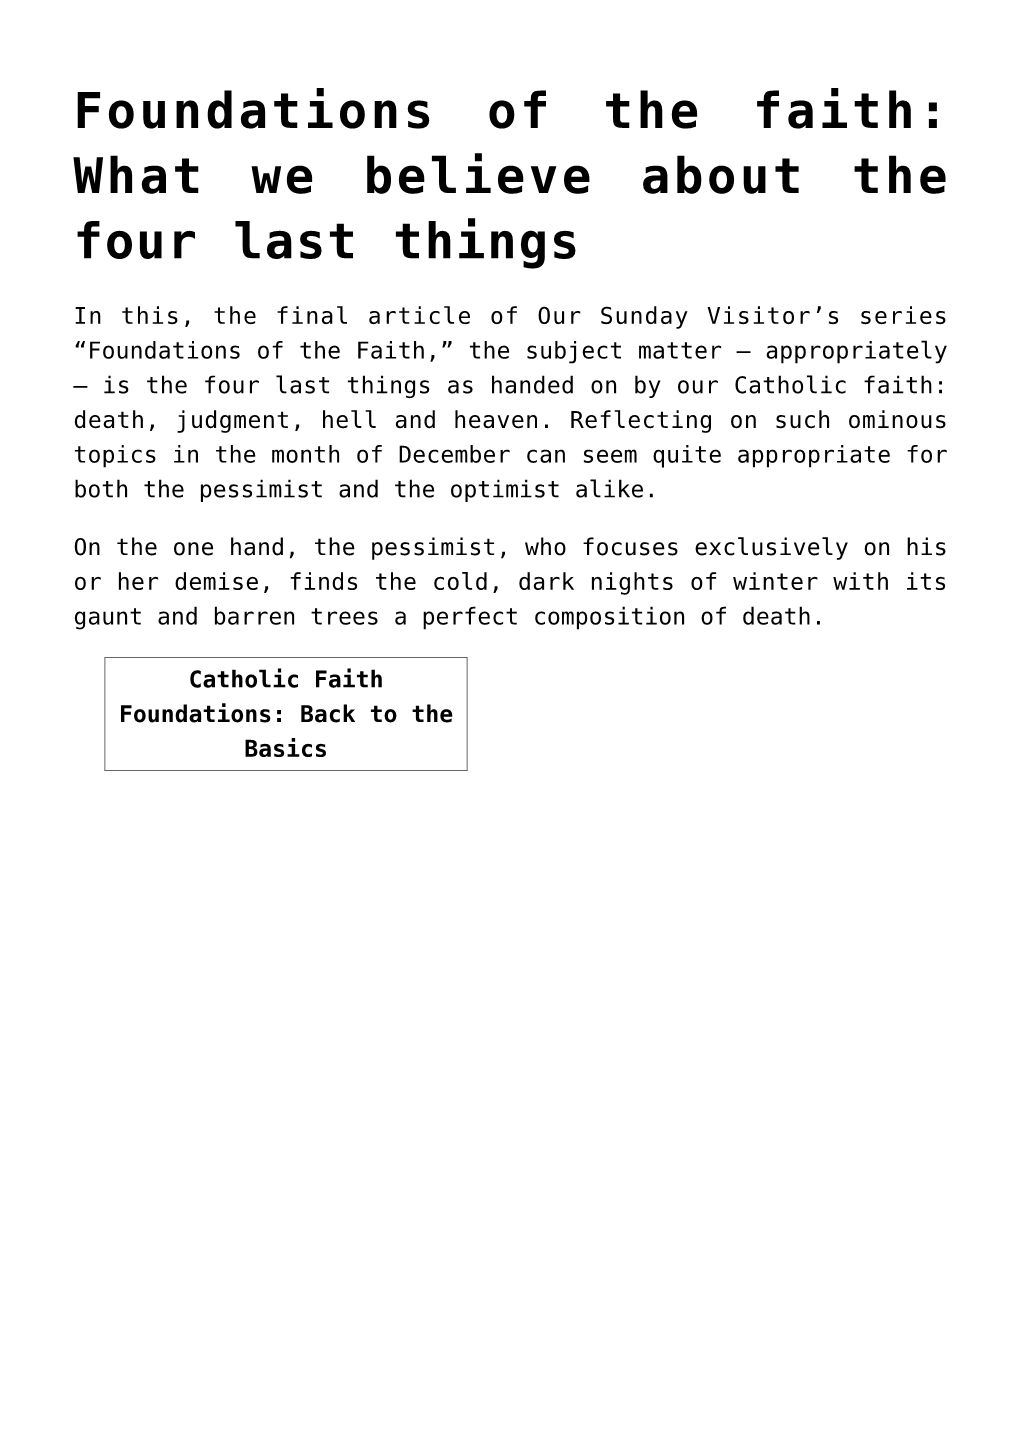 Foundations of the Faith: What We Believe About the Four Last Things